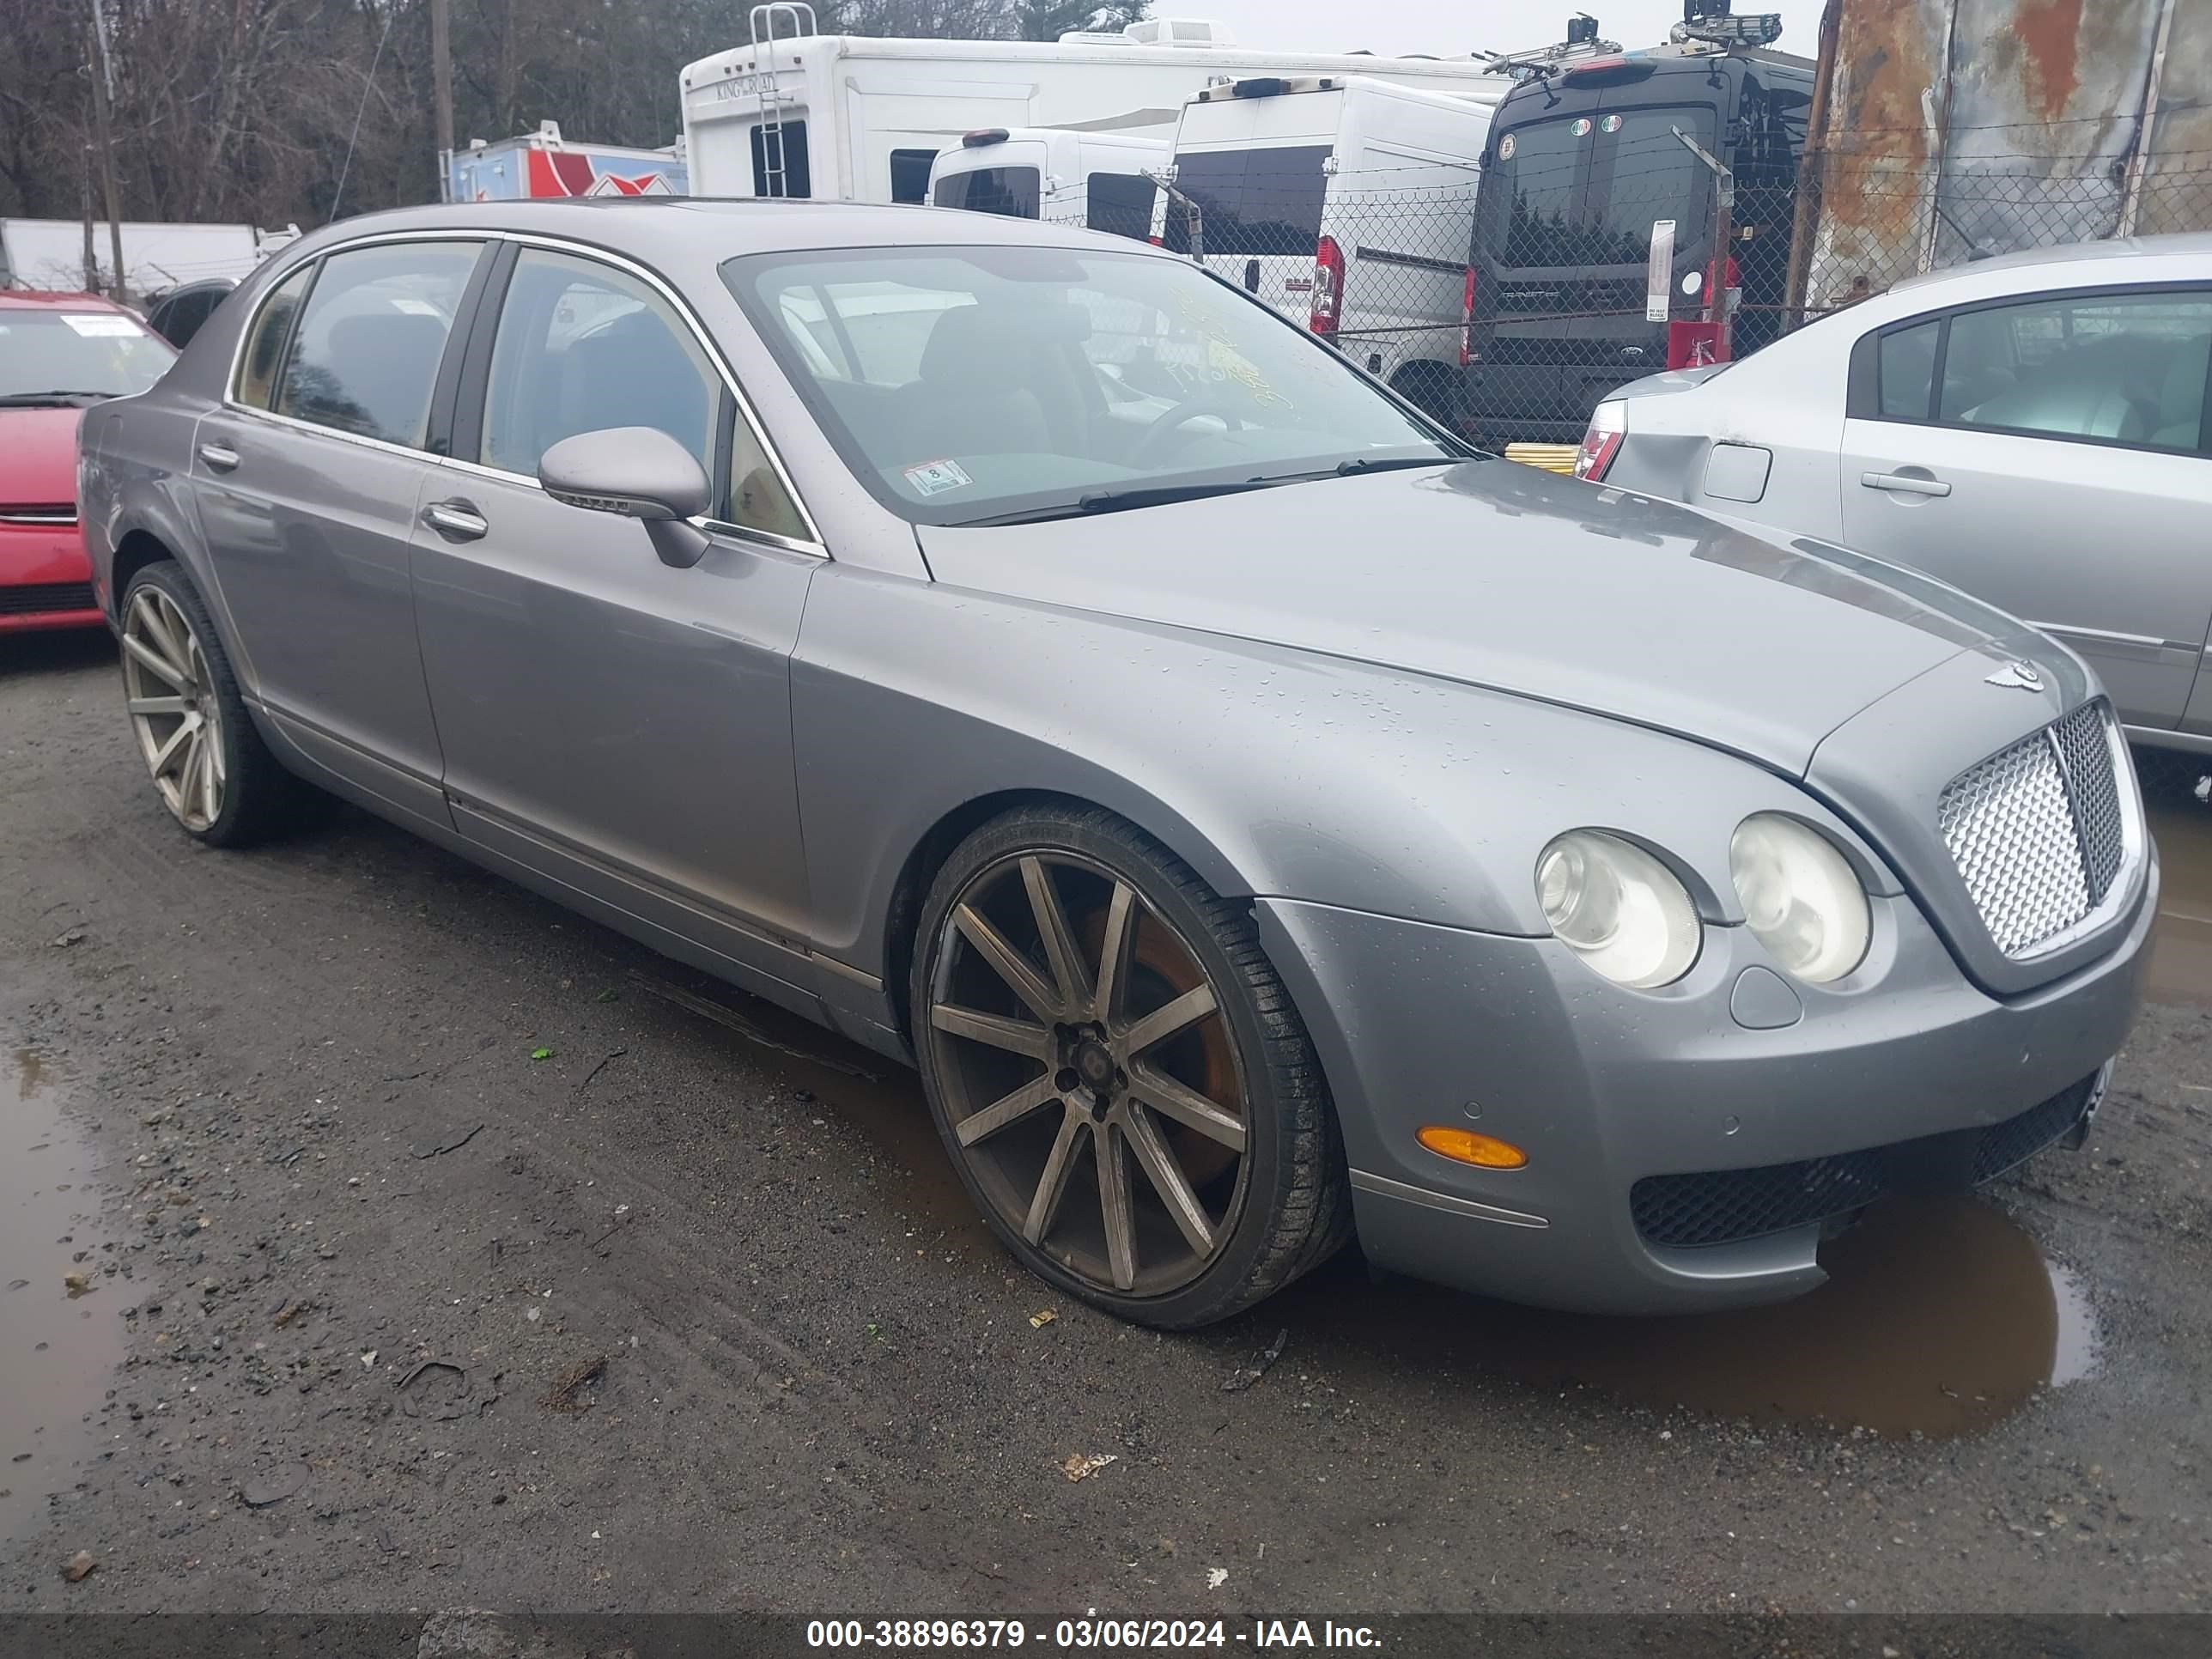 VIN: SCBBR53W26C035385 - bentley continental flying spur